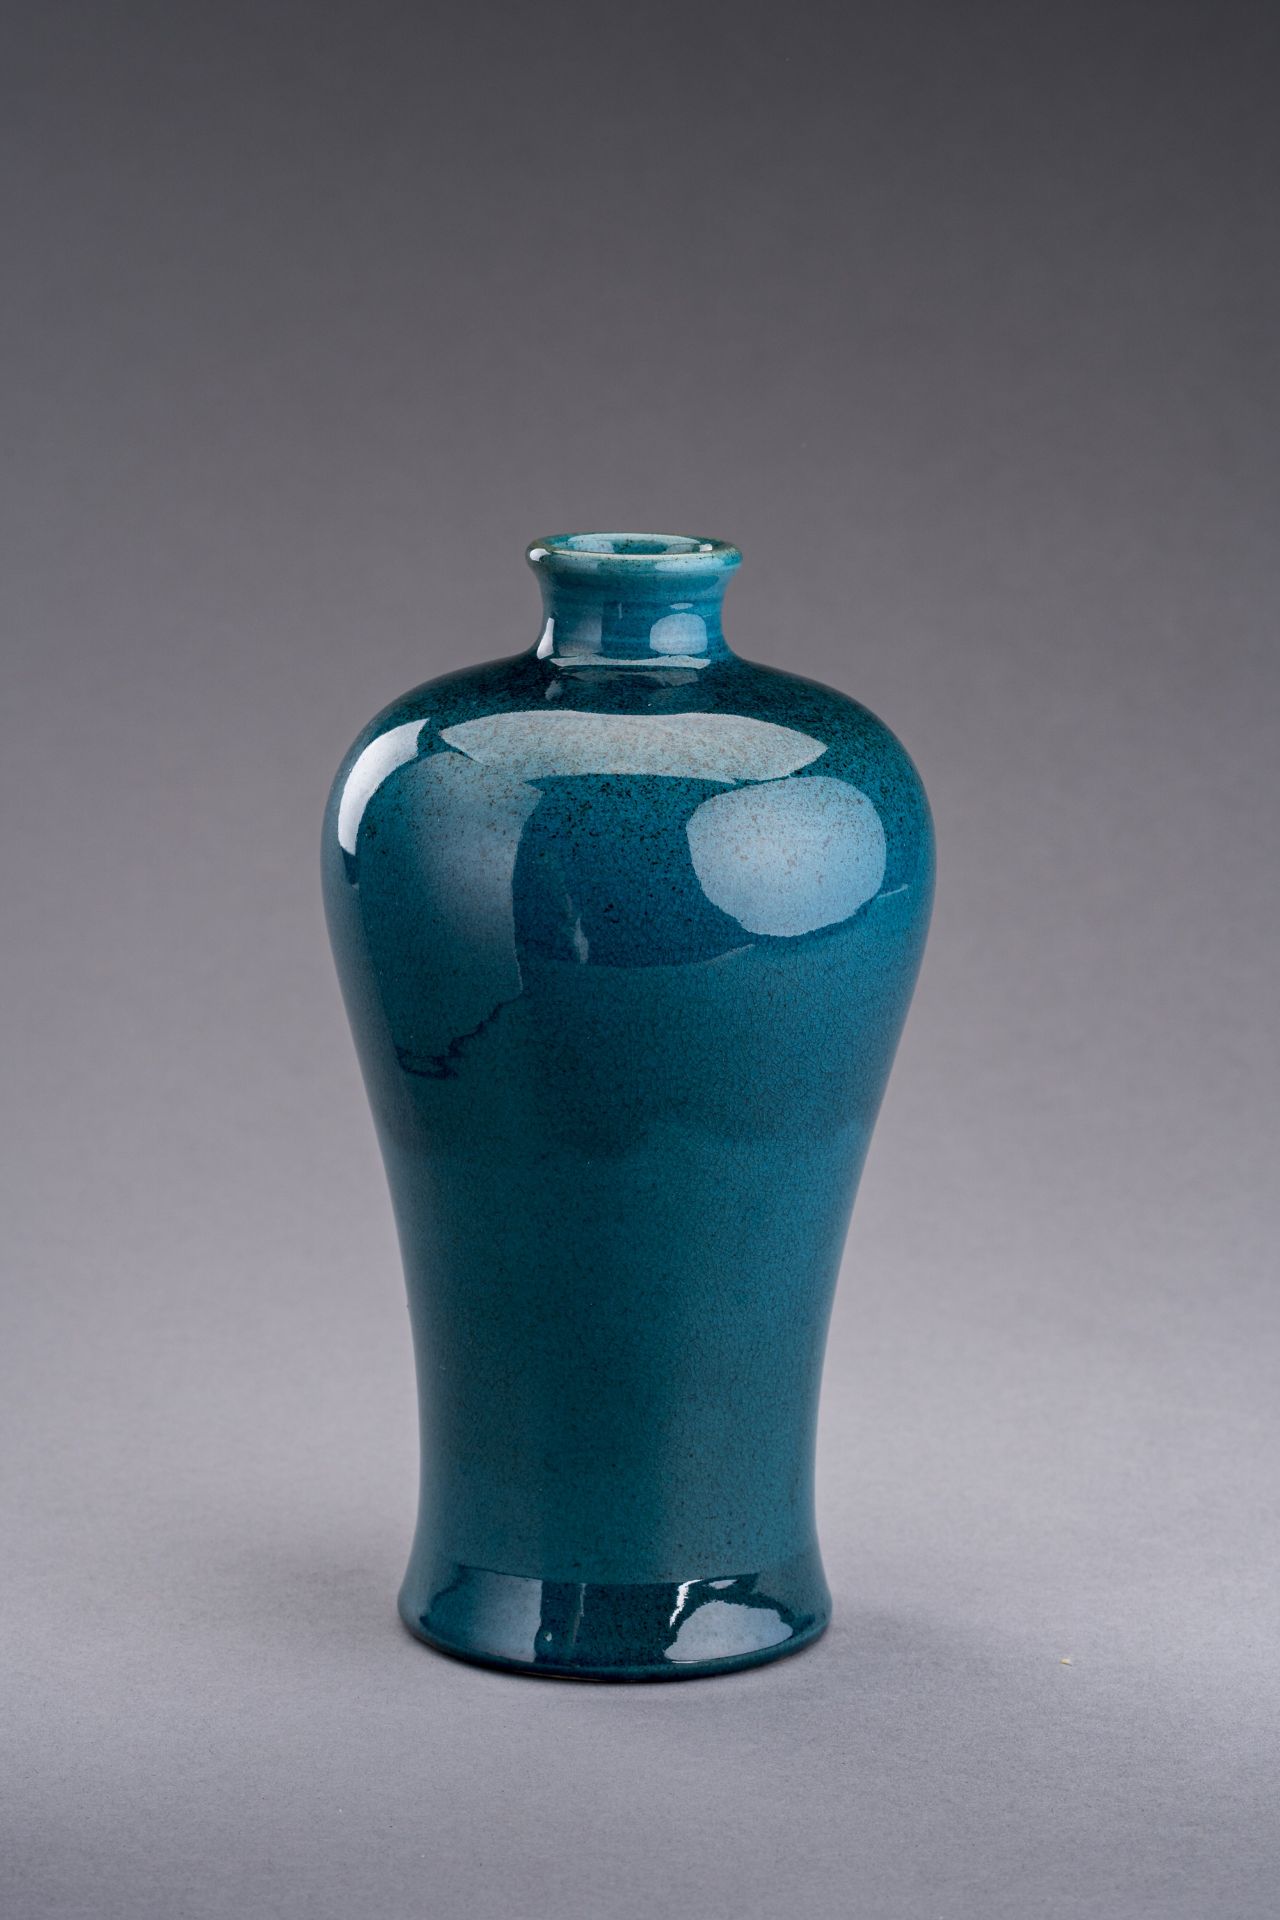 A TURQUOISE CRACKLE-GLAZED PORCELAIN VASE, MEIPING, c. 1920s - Image 4 of 6